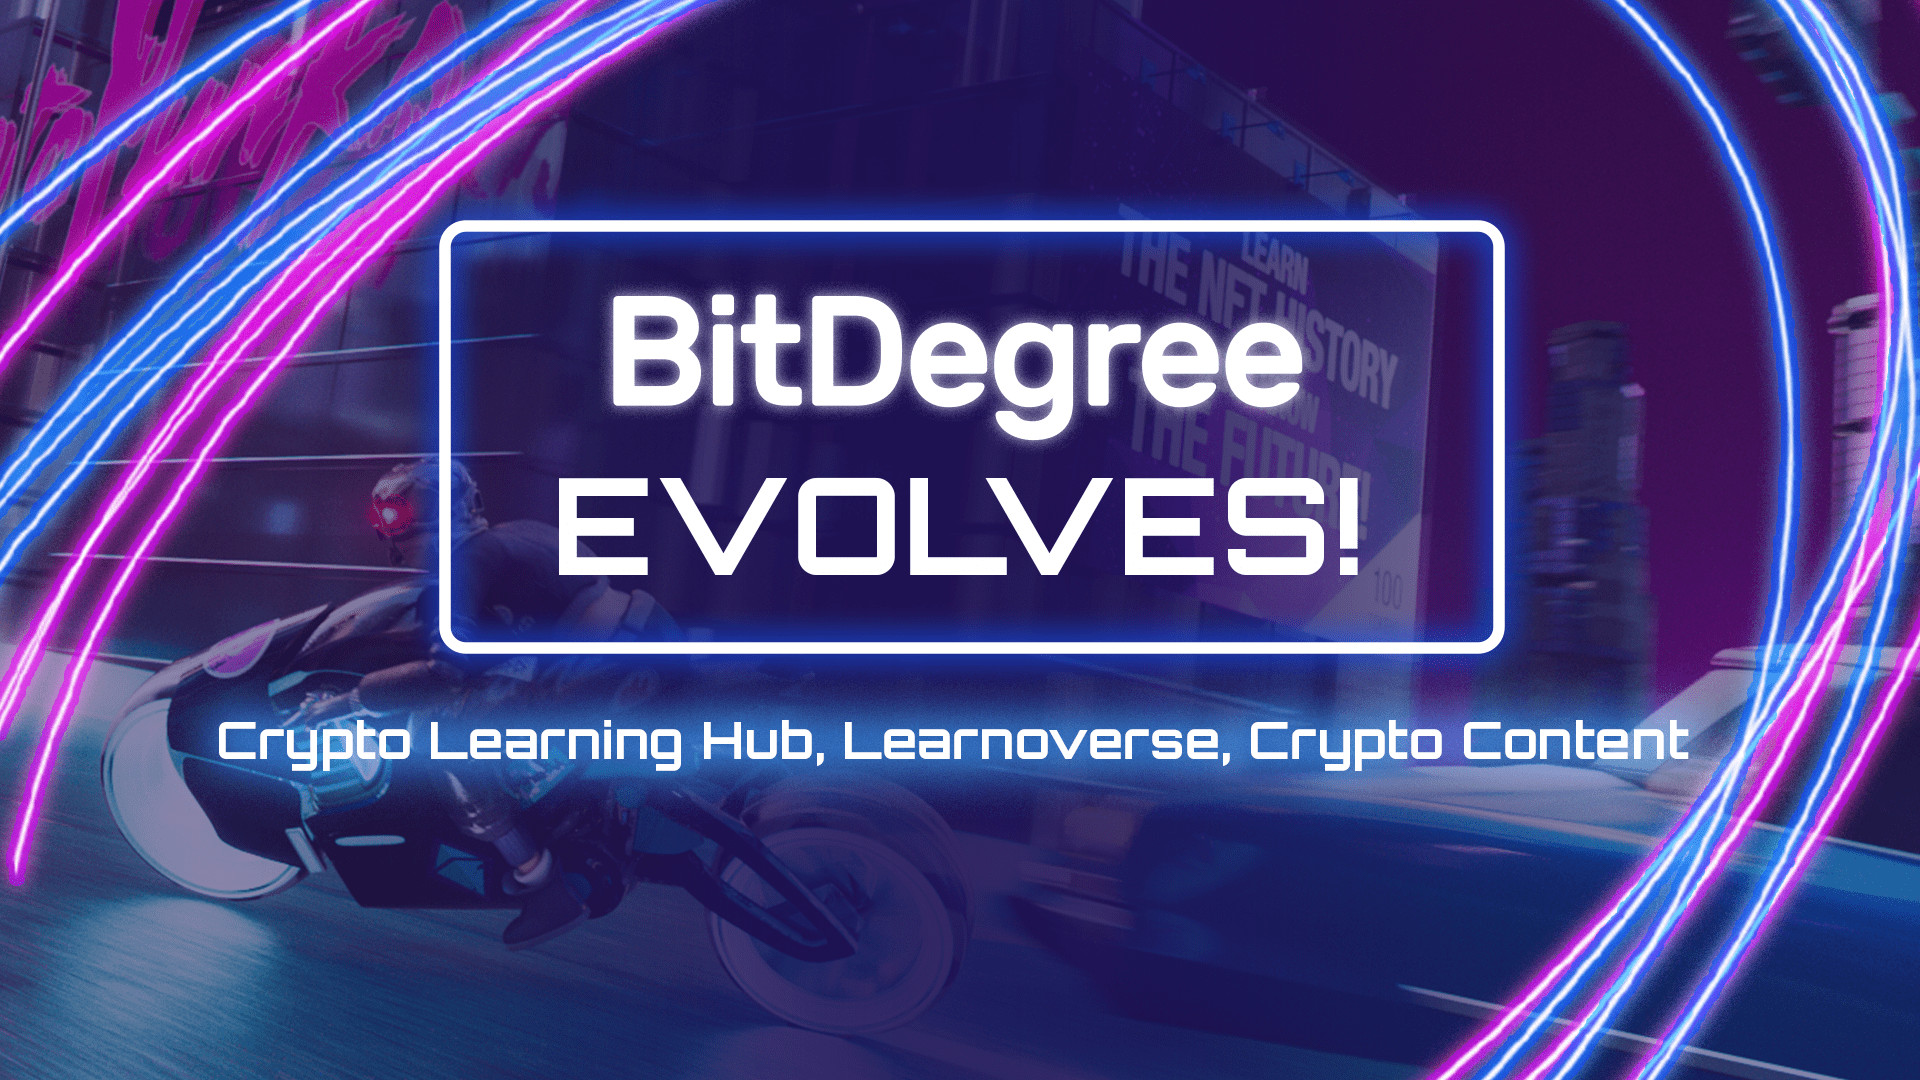 BitDegree Evolves! Here Is What You Need to Know About Learnoverse, Crypto Learning Hub & Content cover image